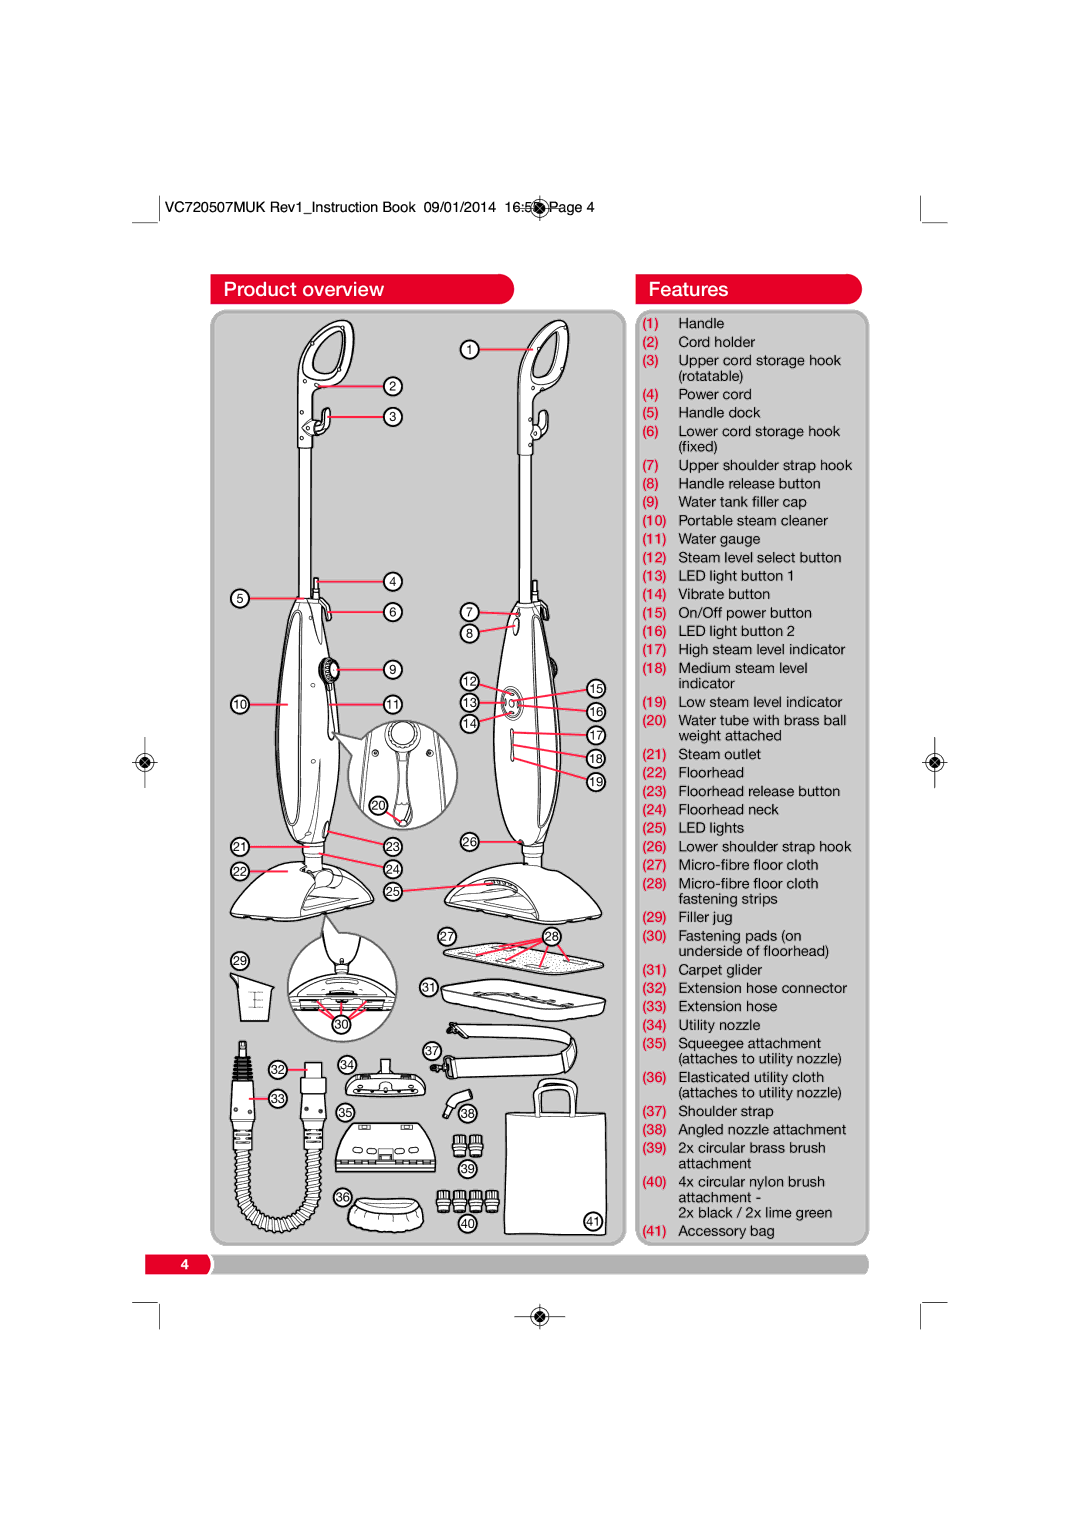 Morphy Richards VC720507MUK manual Product overview Features 